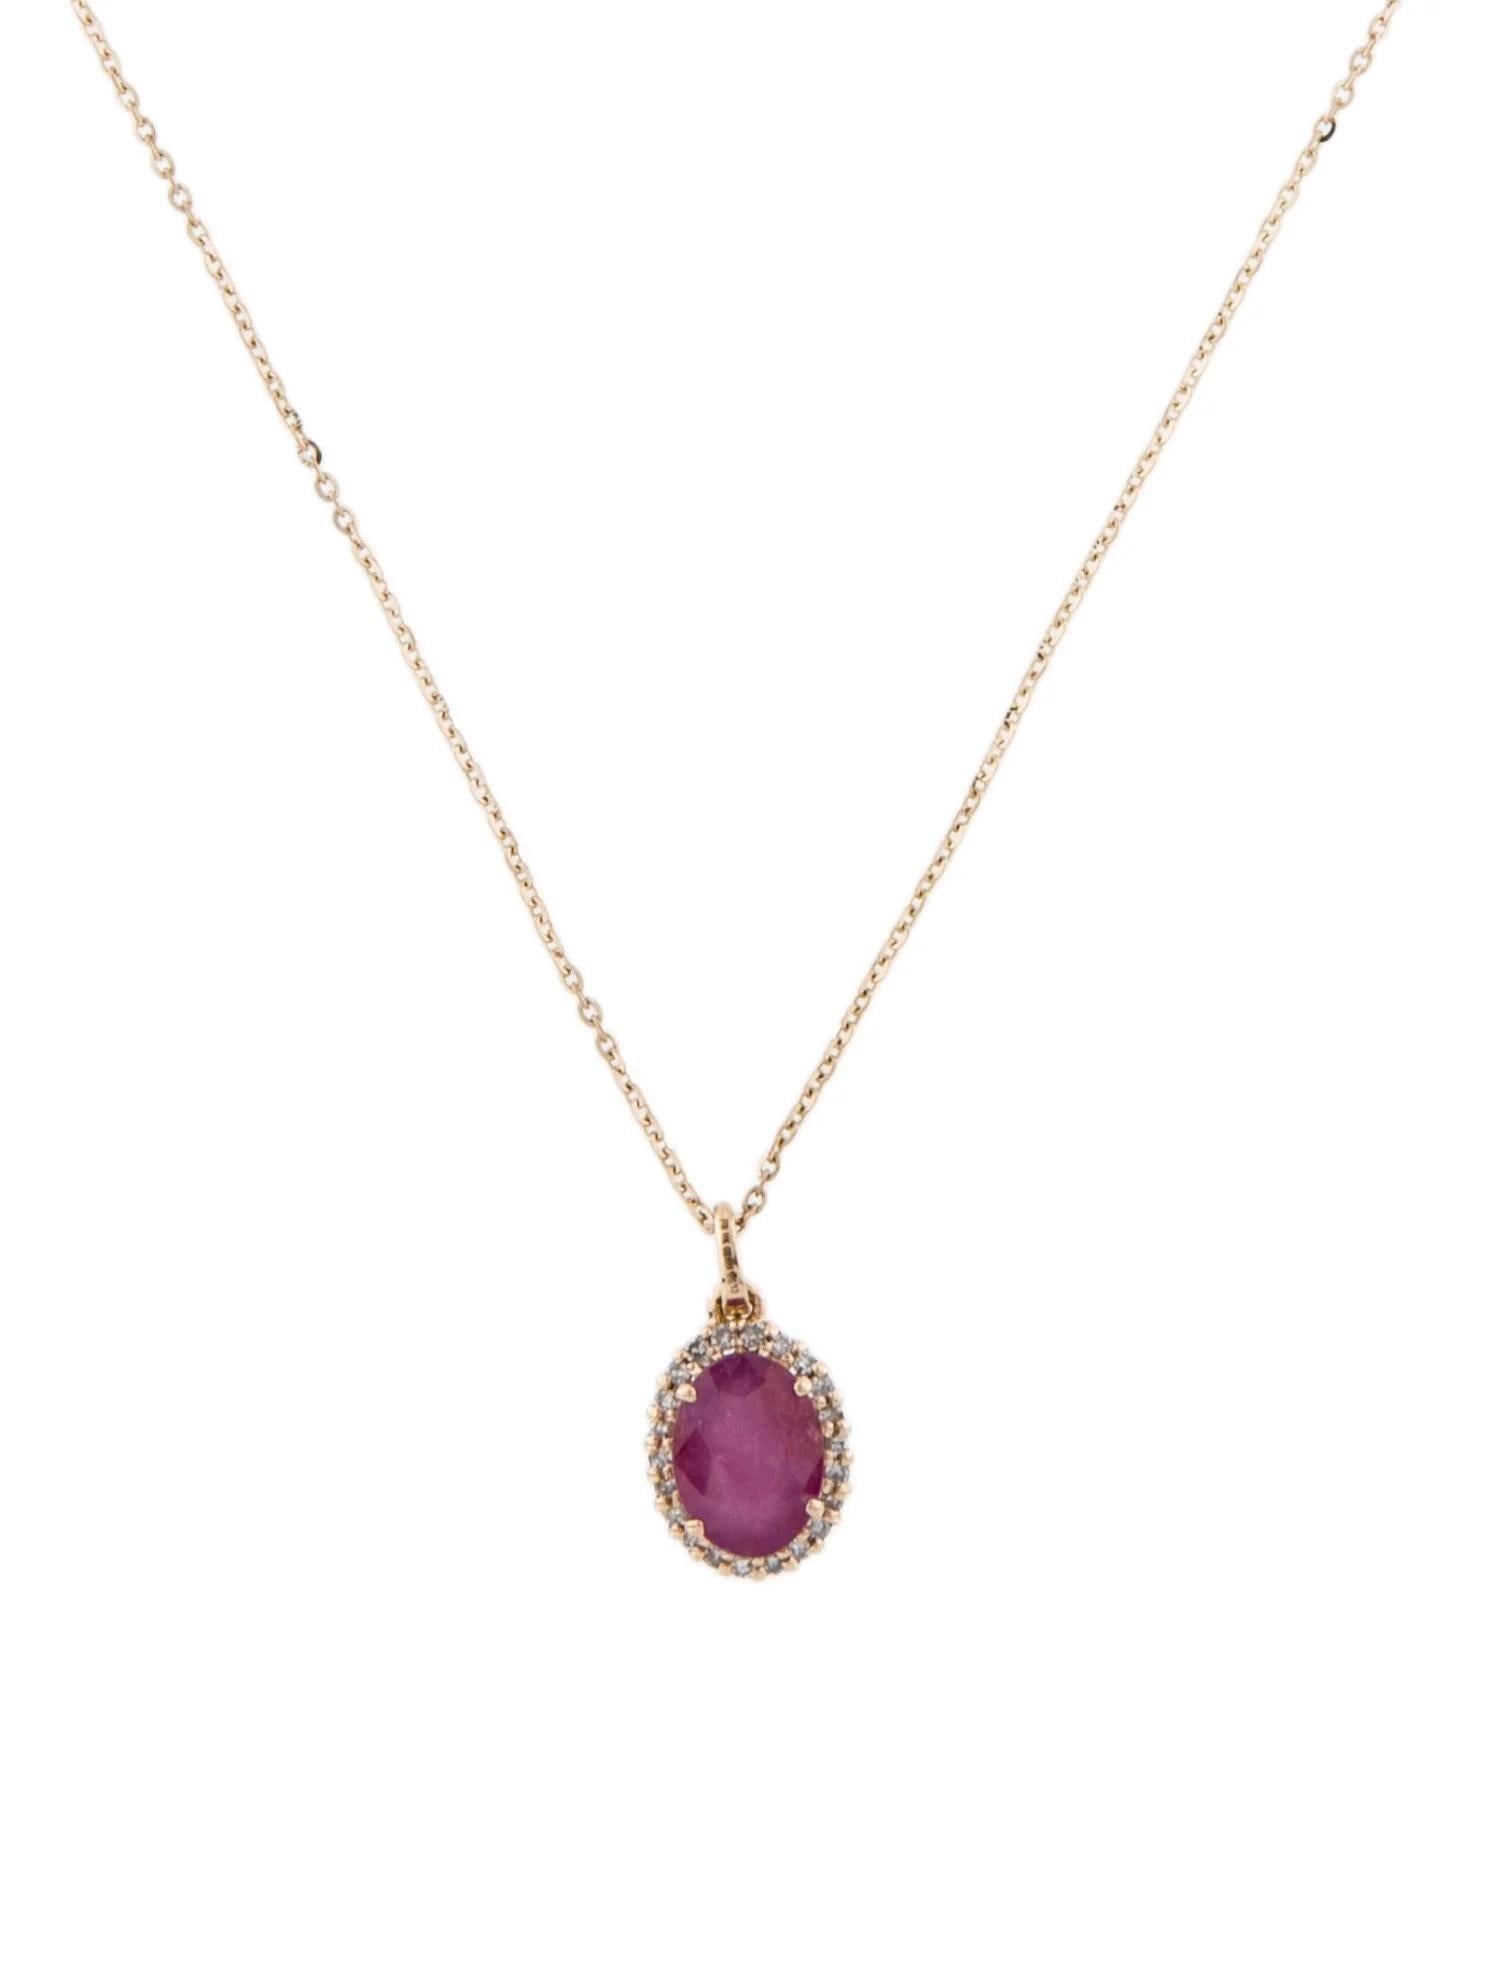 Oval Cut 14K Ruby & Diamond Pendant Necklace  1.70ct Oval Modified Brilliant Ruby  0.08 For Sale